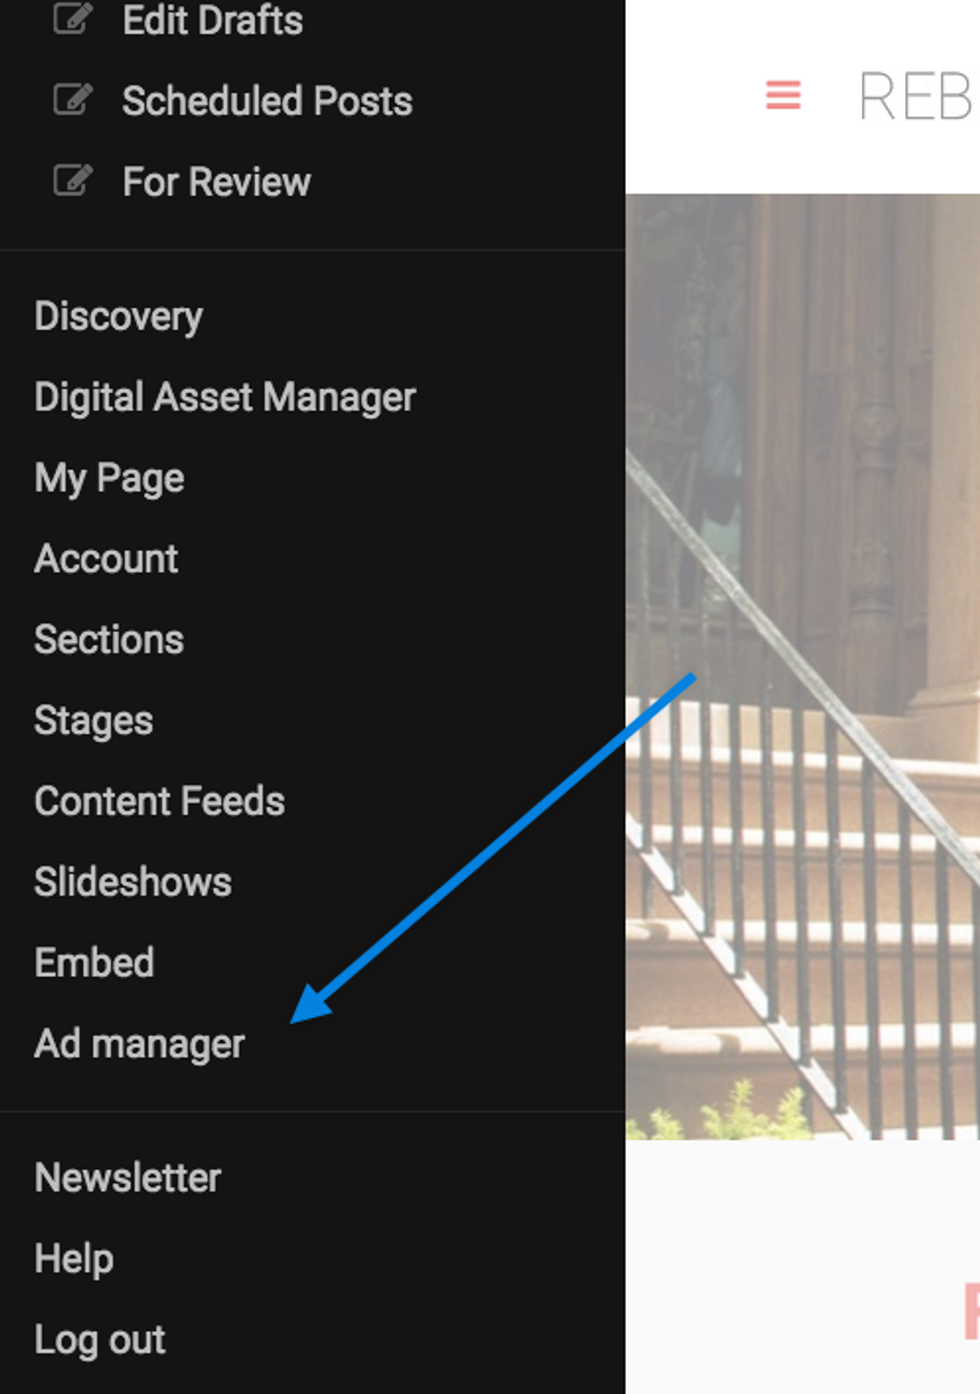 Ad Manager option in the left hamburger menu